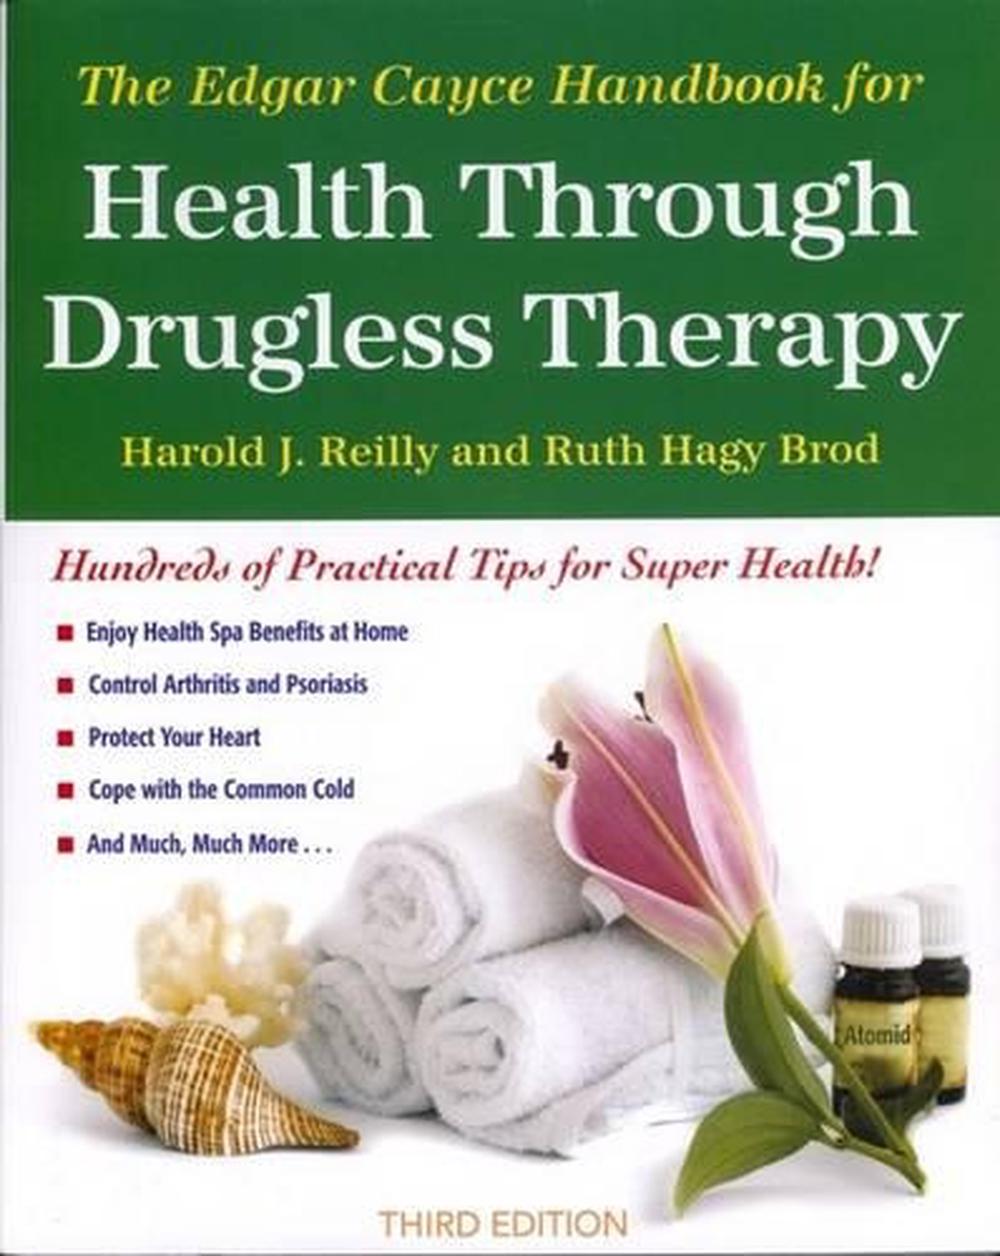 The Edgar Cayce Handbook For Health Through Drugless Therapy By Harold